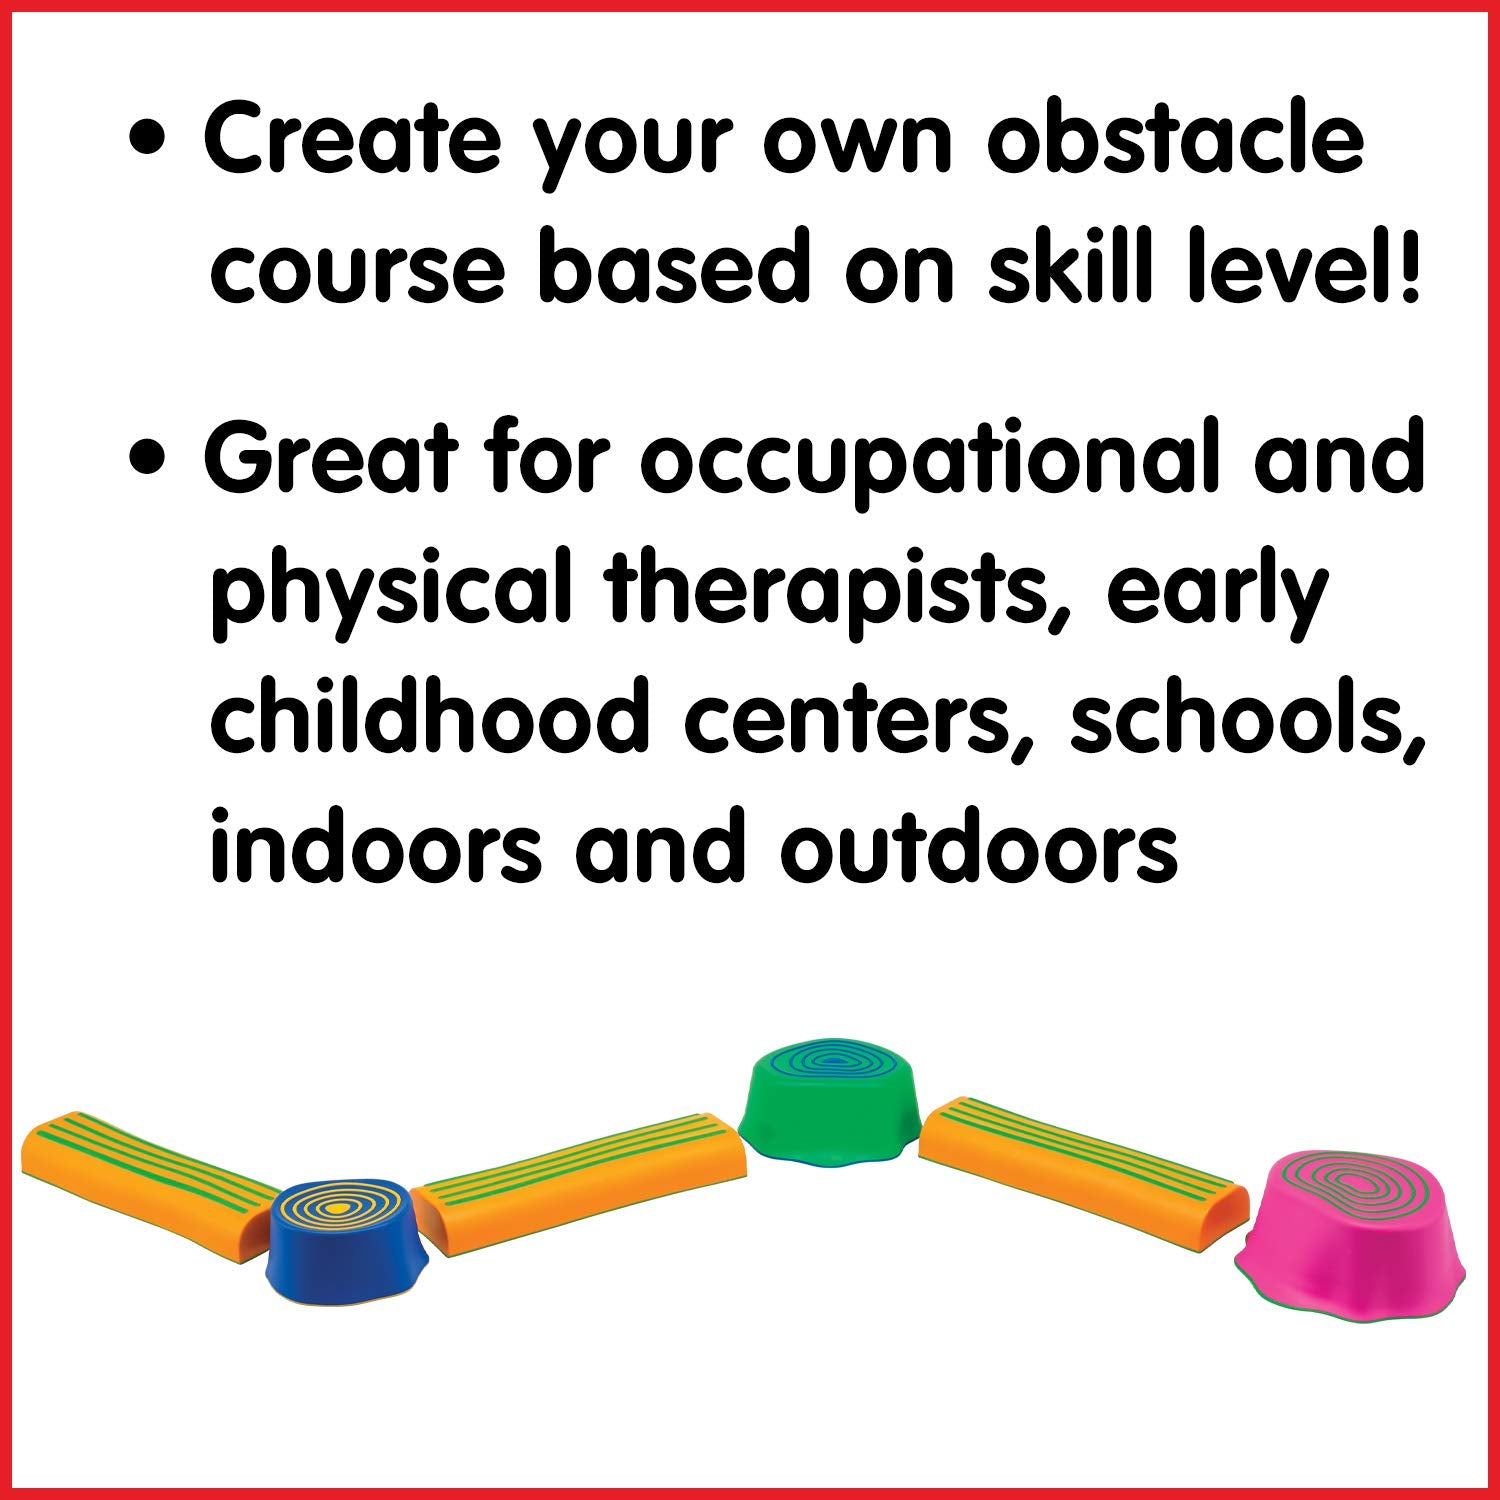 edxeducation Step-a-Trail - 6 Piece Obstacle Course for Kids - Indoor and Outdoor - Build Coordination and Confidence - Physical and Imaginative Play